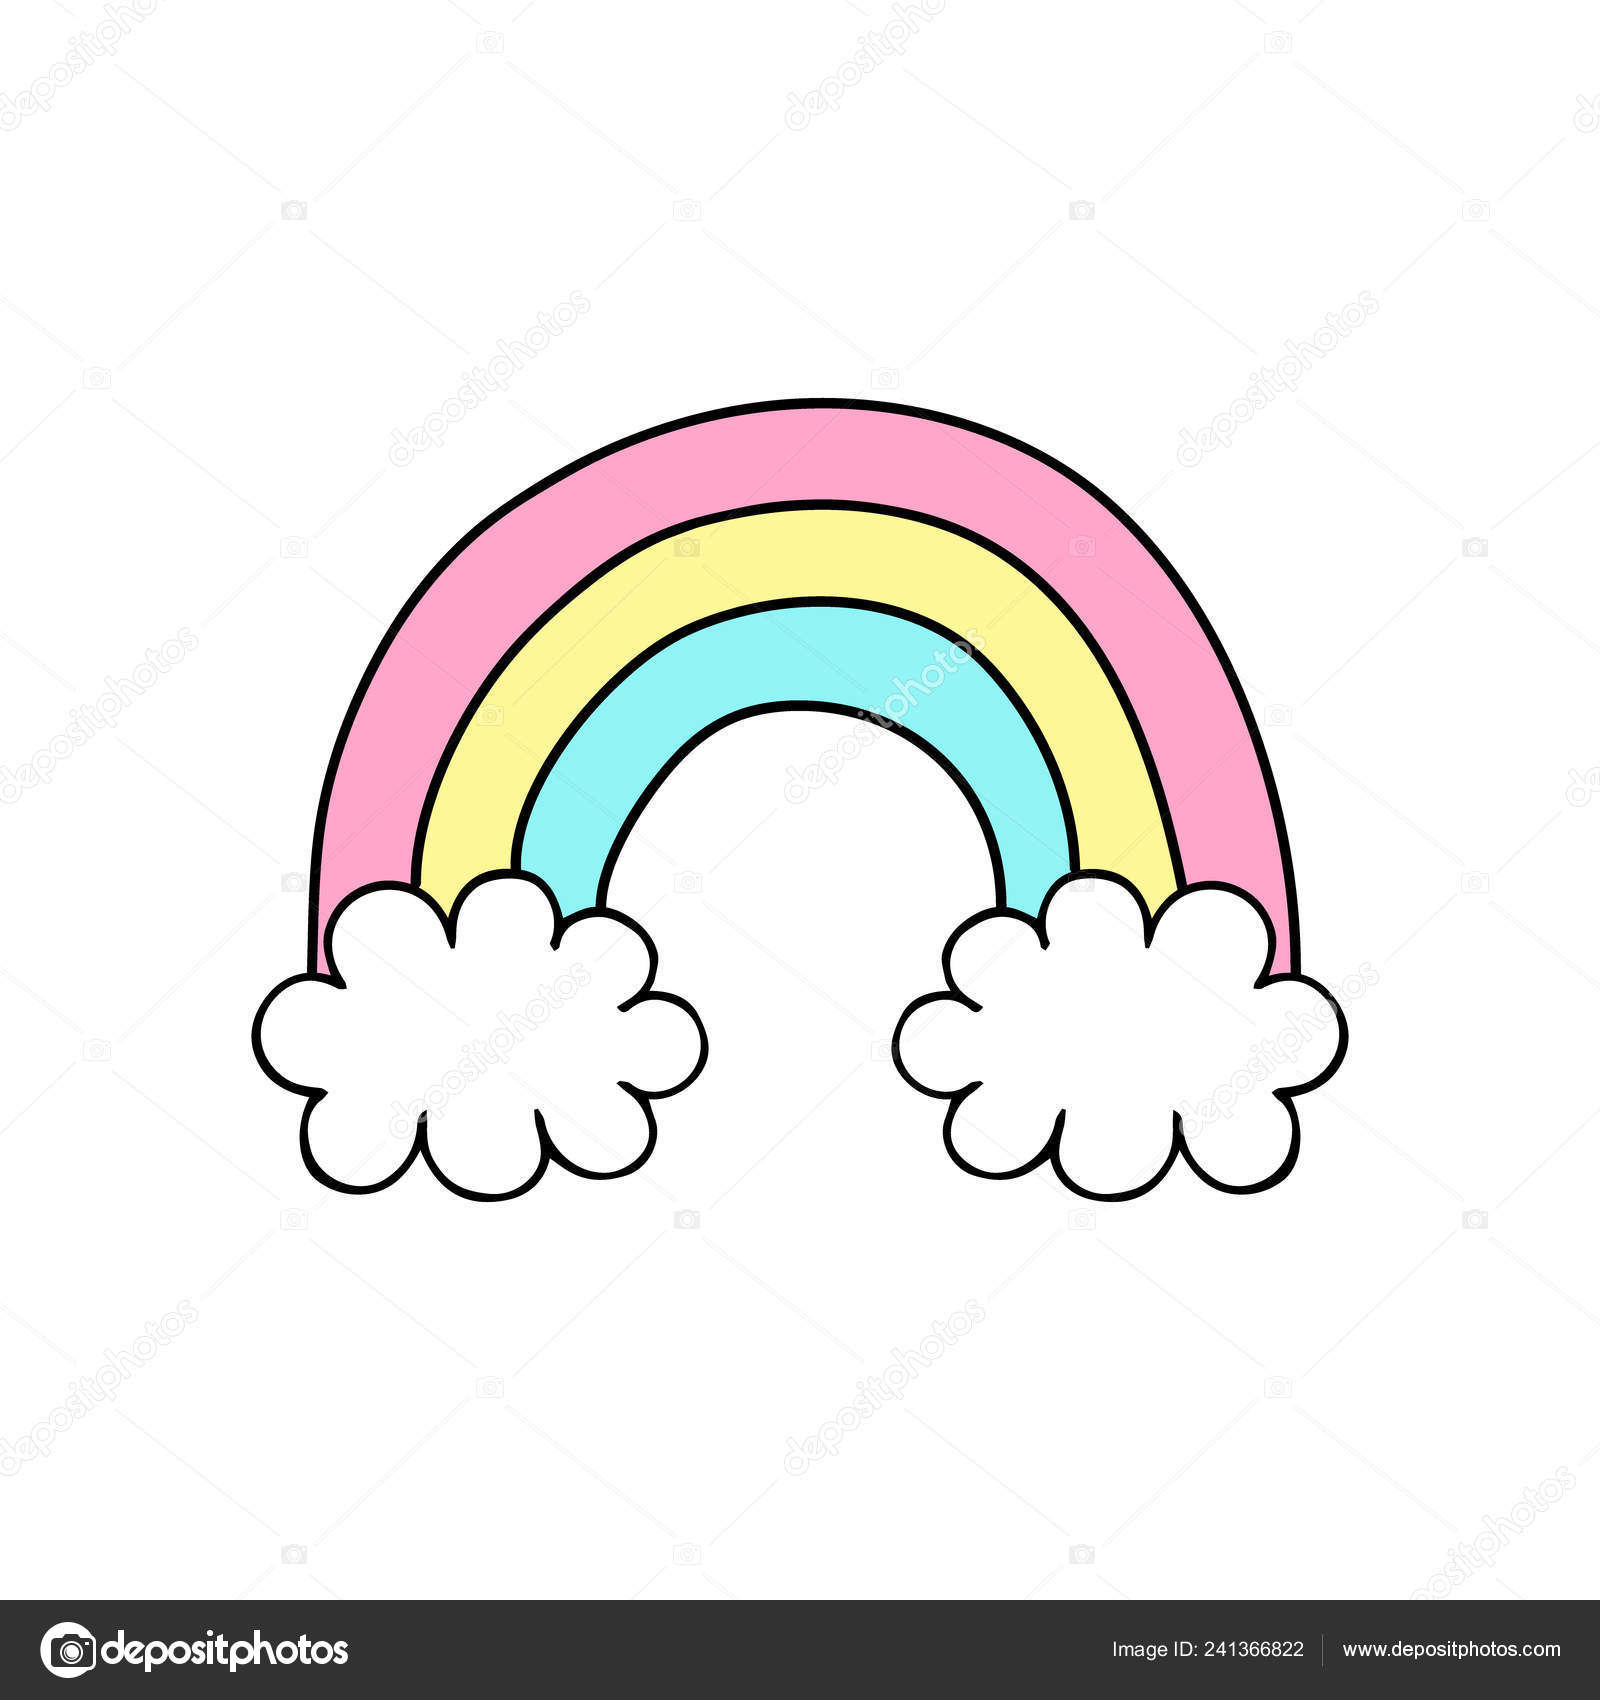 Cute Rainbow Vector Illustration Doodle Drawing Rainbow Clouds ...